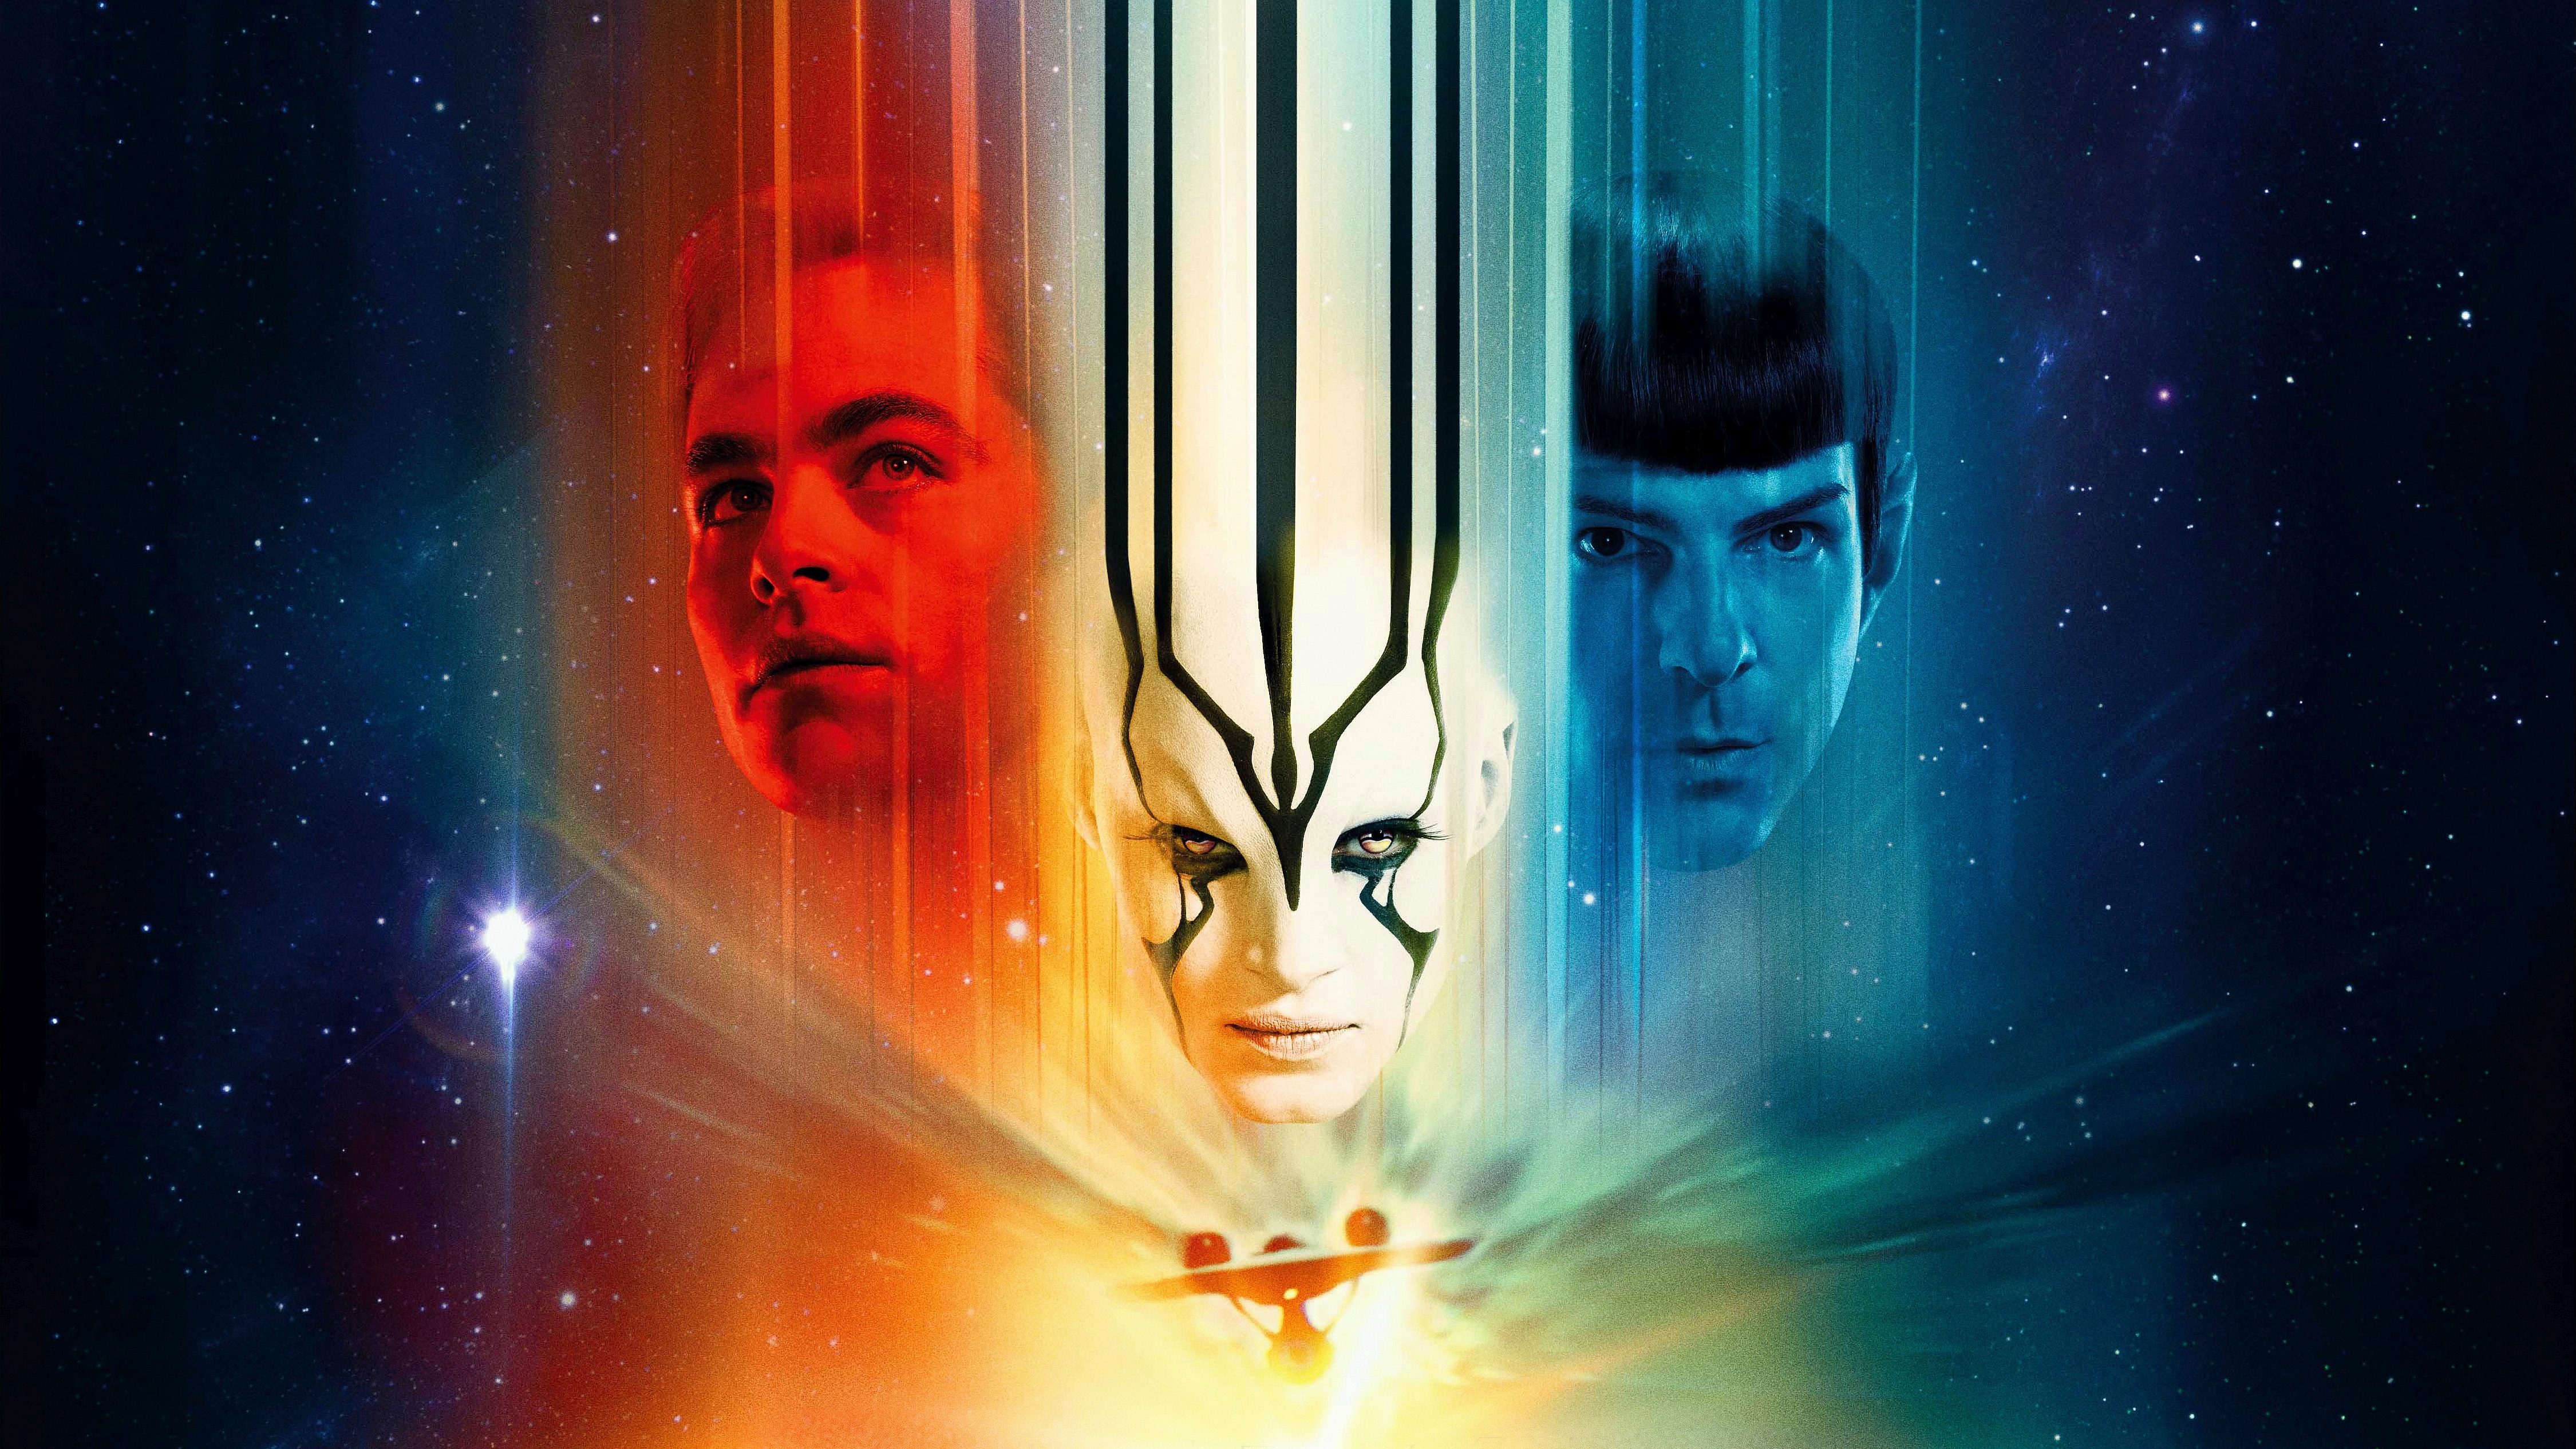 star trek beyond poster the motion picture